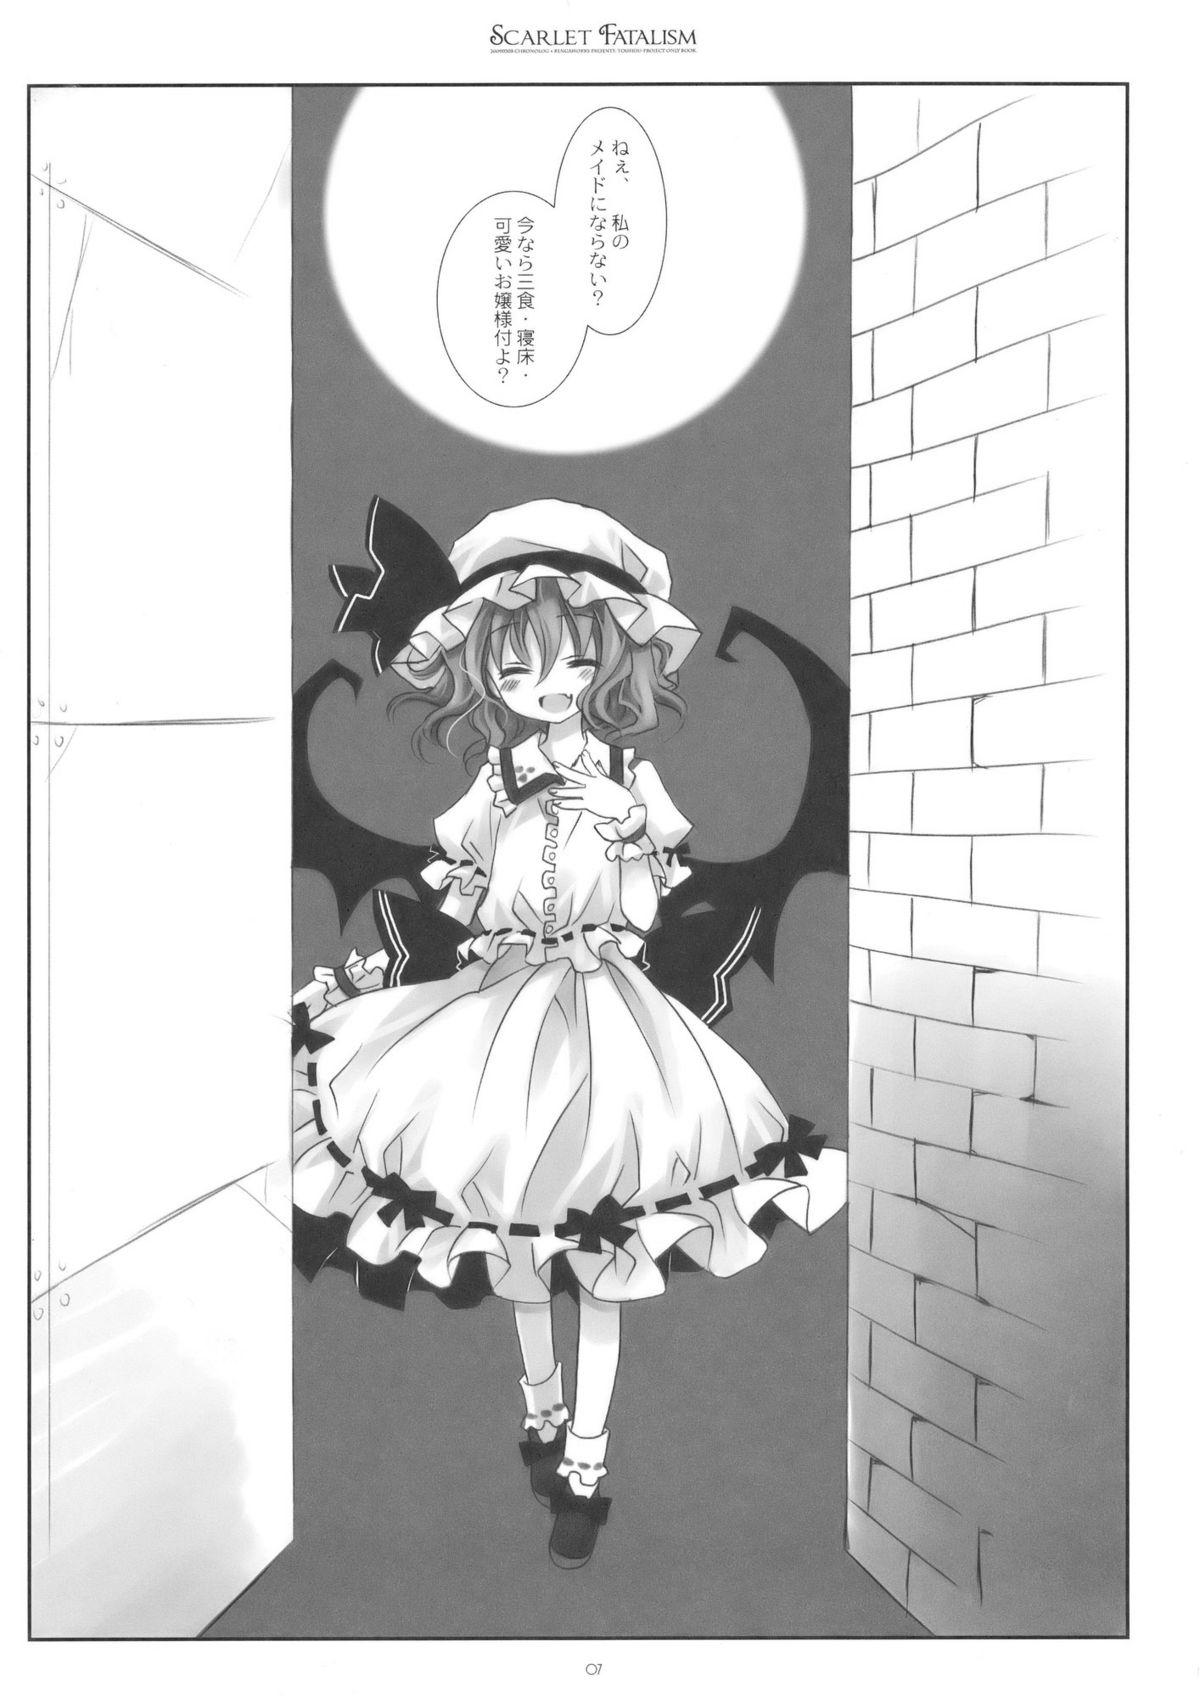 Blowjob Scarlet Fatalism - Touhou project Tinytits - Page 7